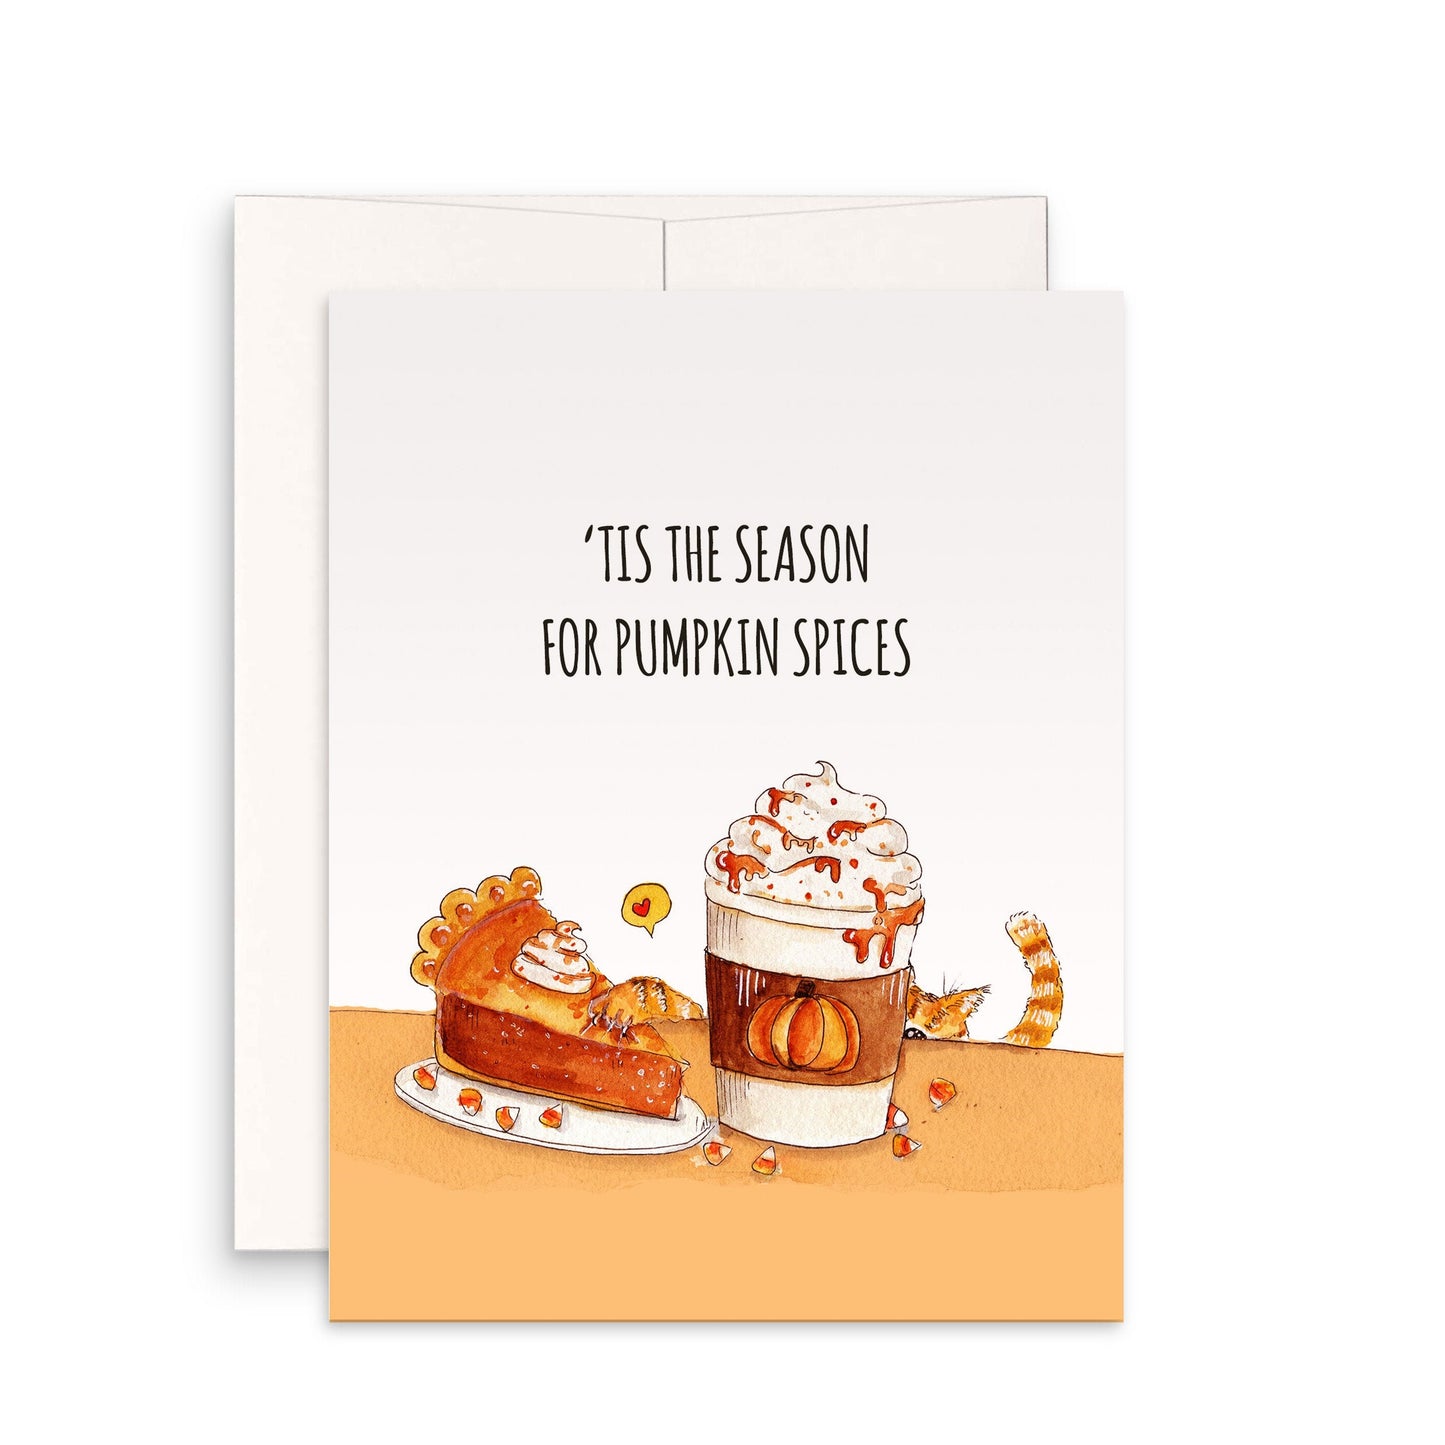 Happy Thanksgiving Card From Orange Cat - Funny Fall Holiday Cards Set - Tis the Season For Pumpkin Spice